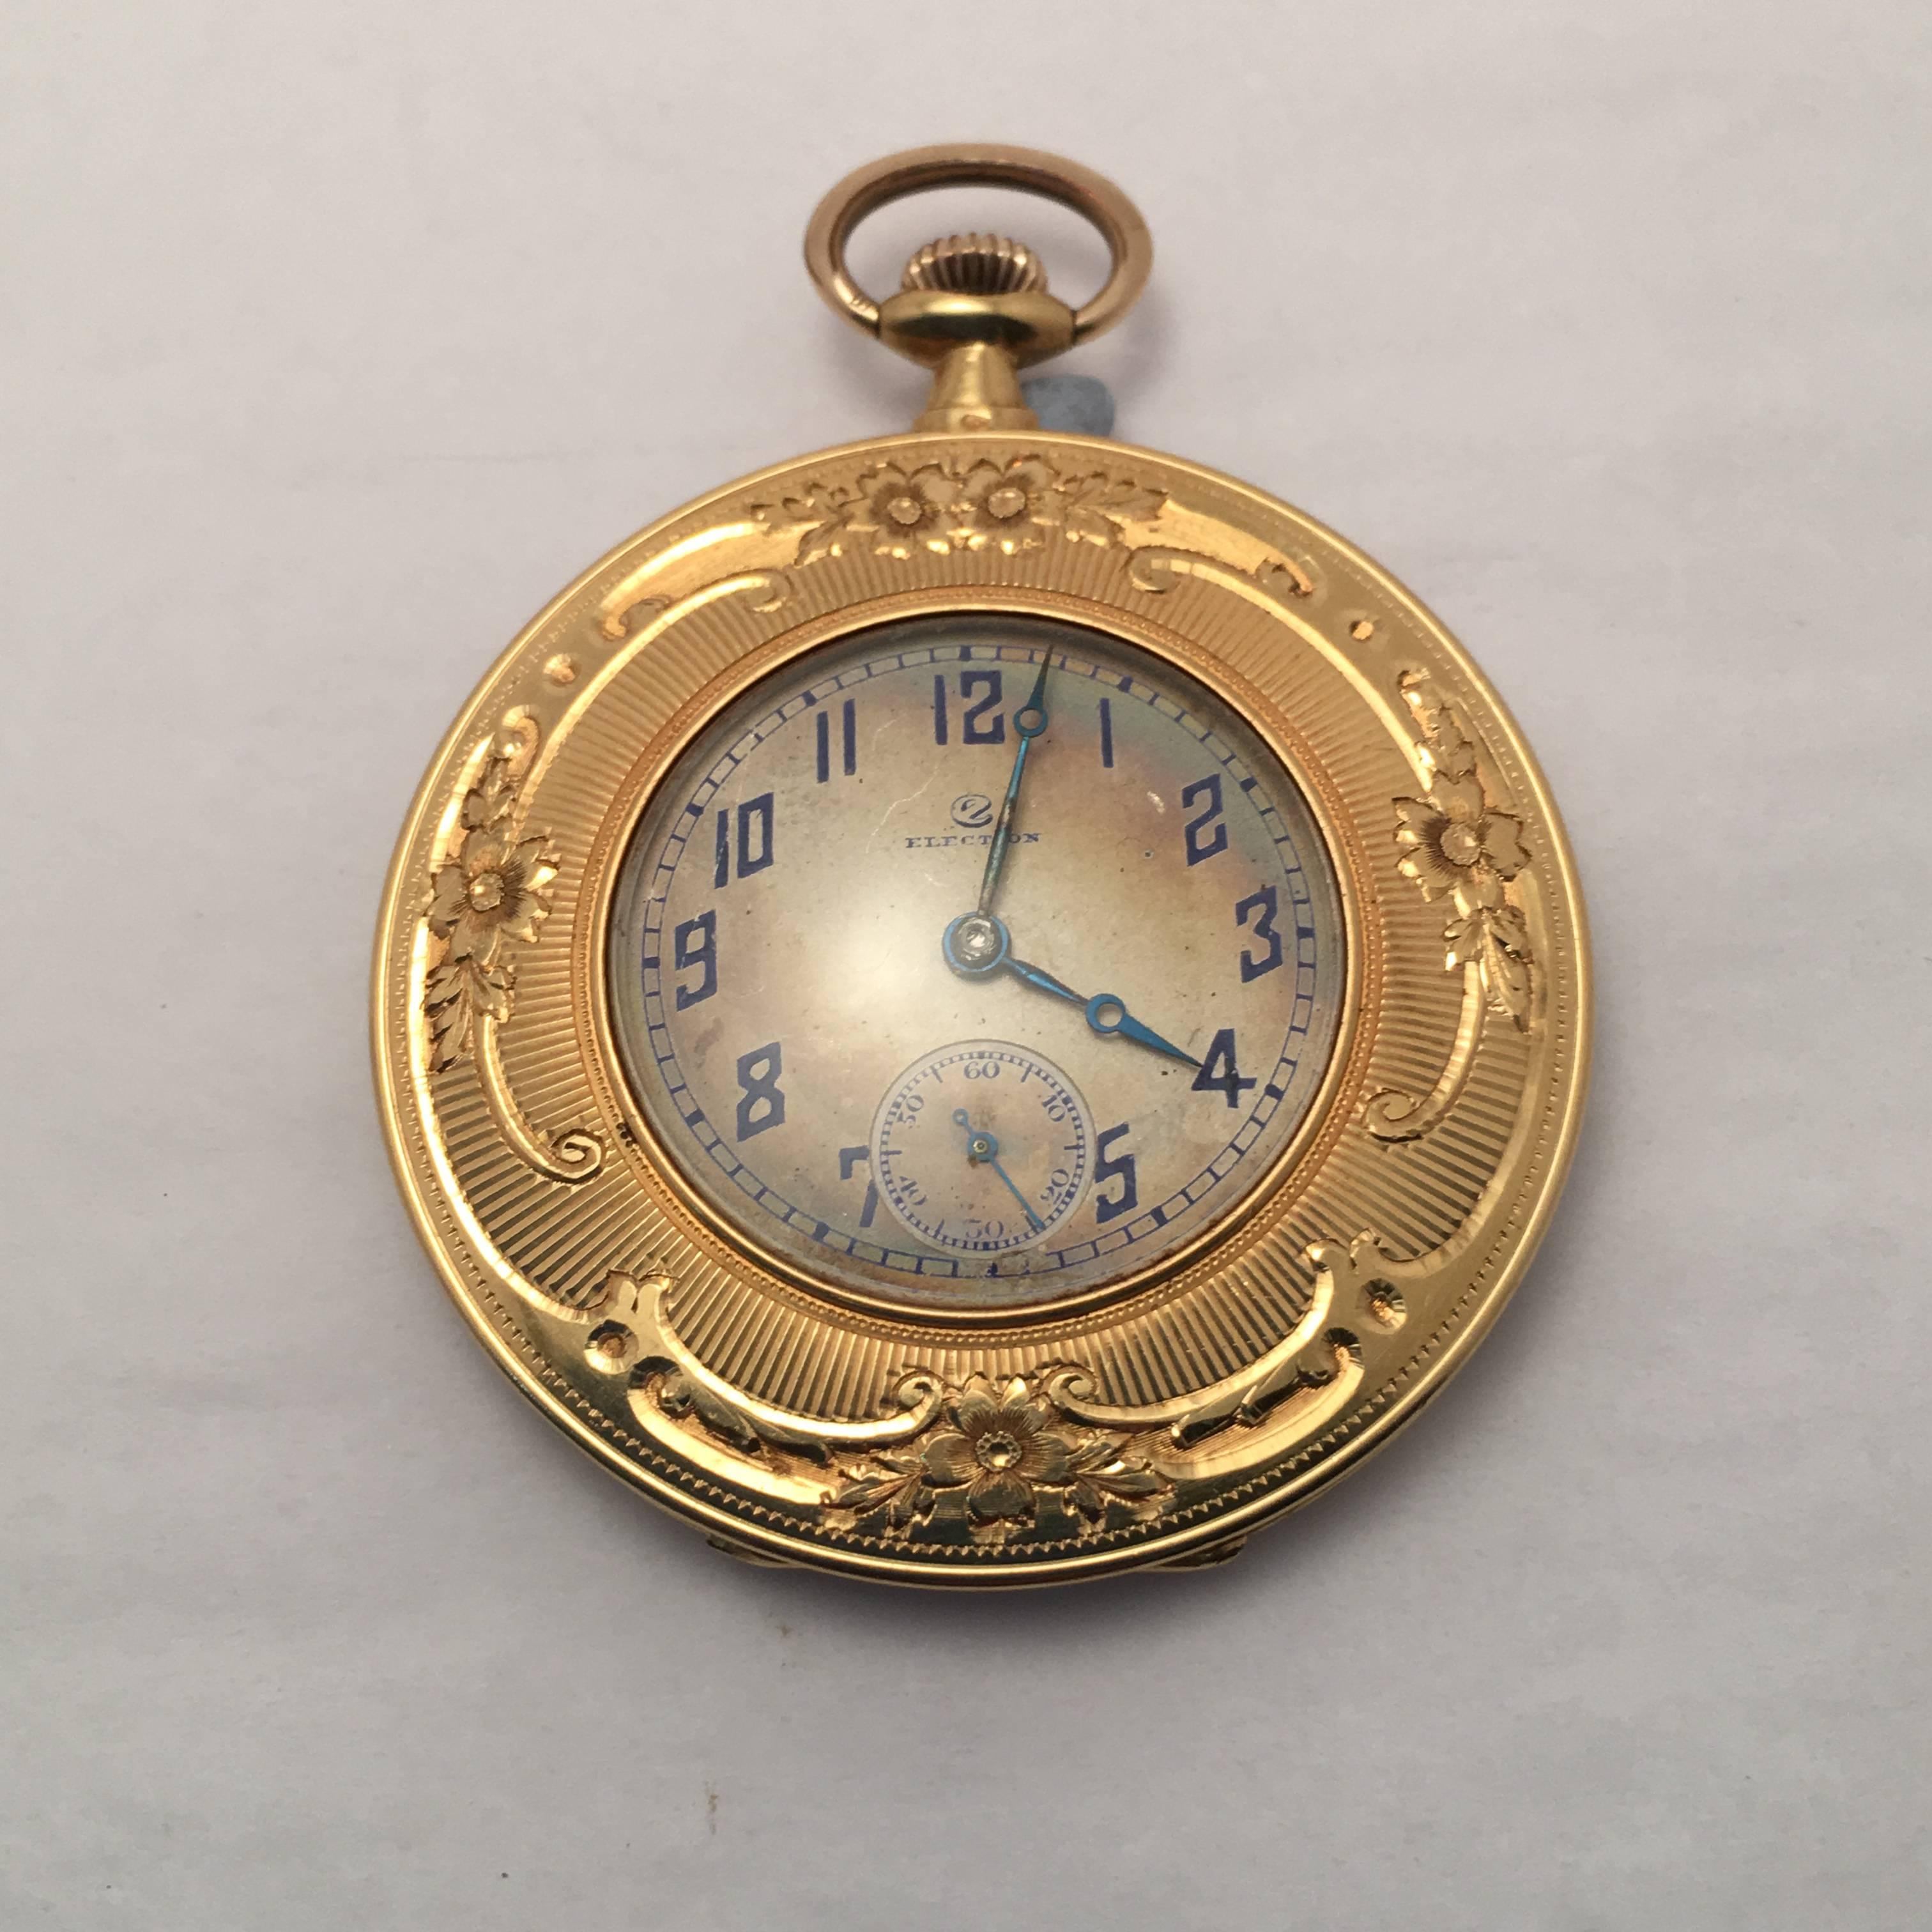 18 Kt. yellow gold Election pocket watch enameled on one side with horse and woman.  Enameling is embellished with gold flower motif.  Face side is also framed with flower motif and has separate minute dial.  The inside of the case is engraved